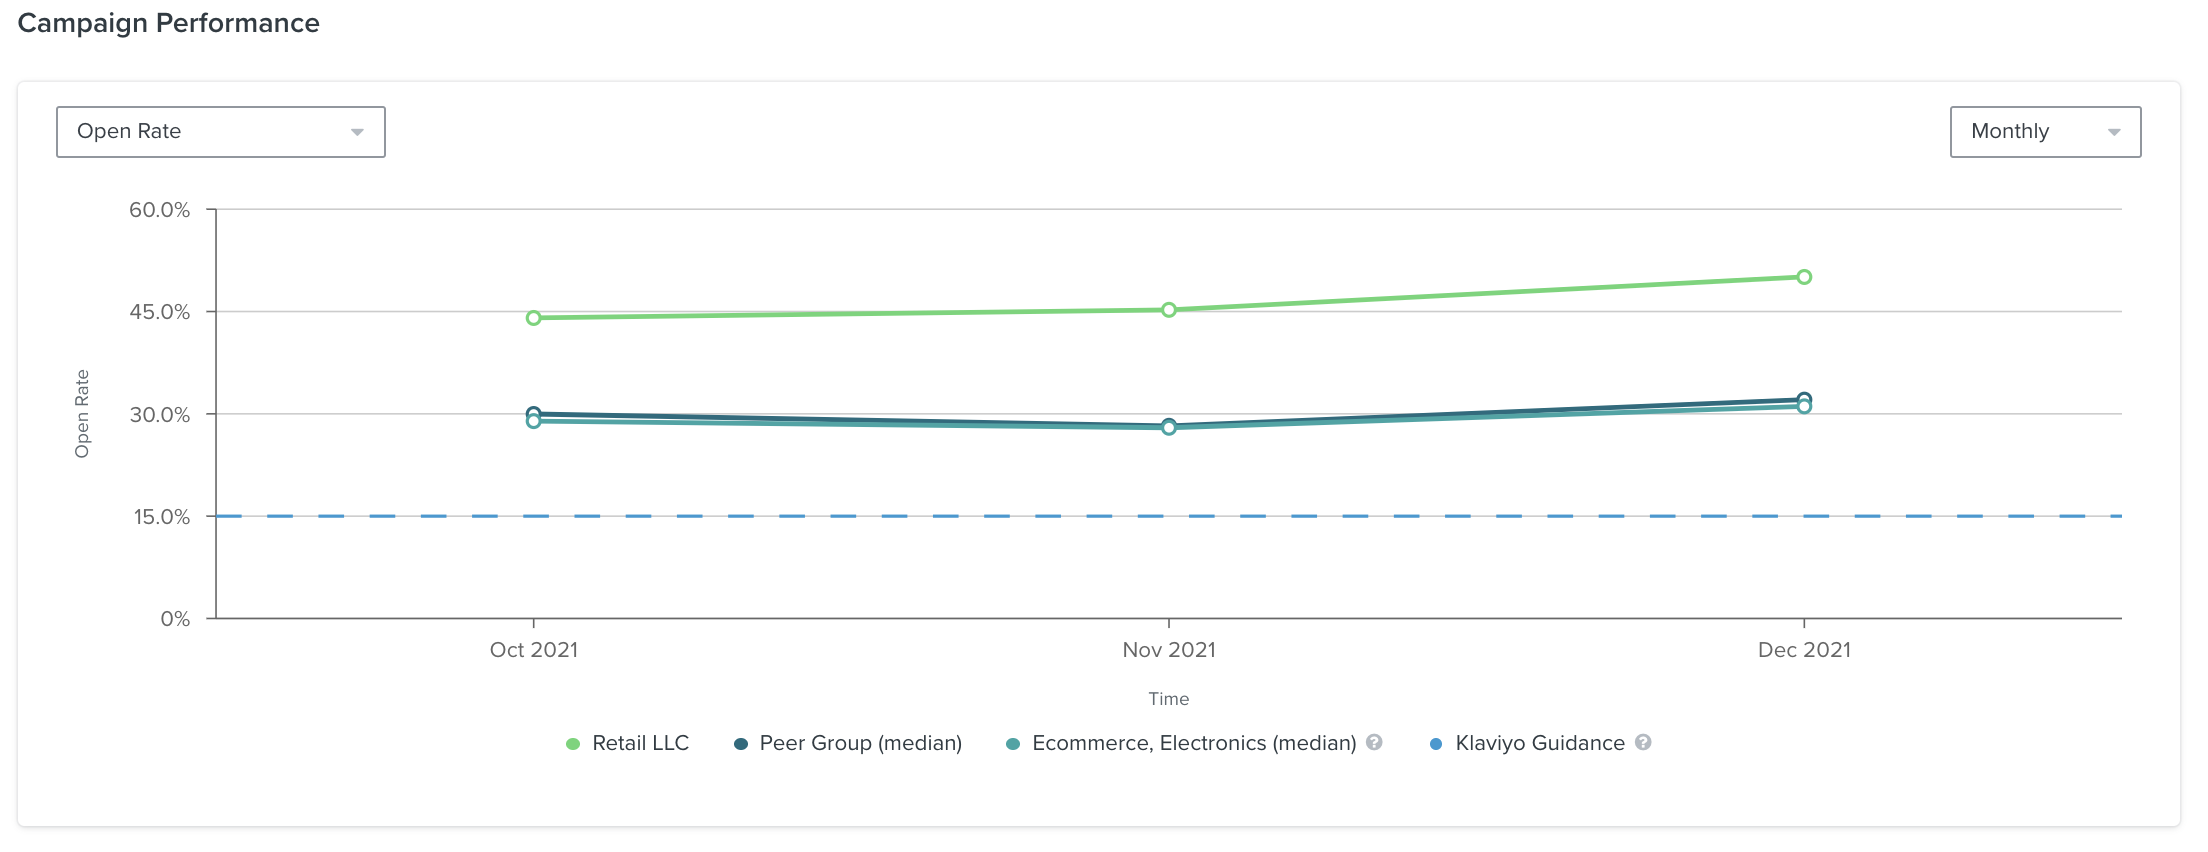 Example of a line graph inside the Email Campaign Performance page showing open rate data monthly